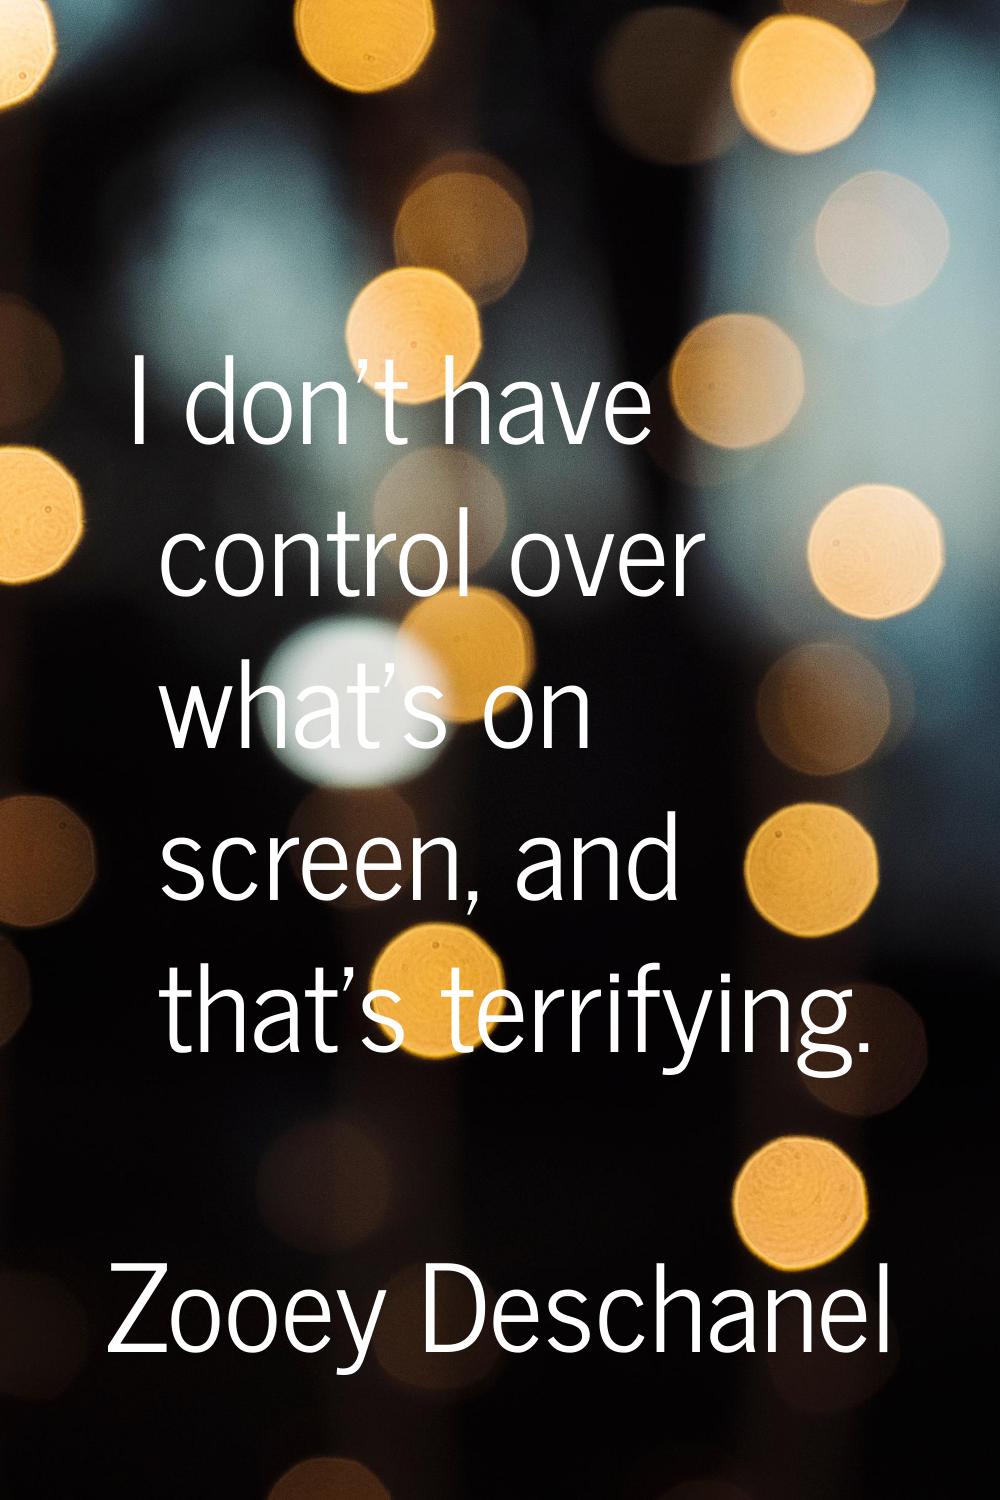 I don't have control over what's on screen, and that's terrifying.